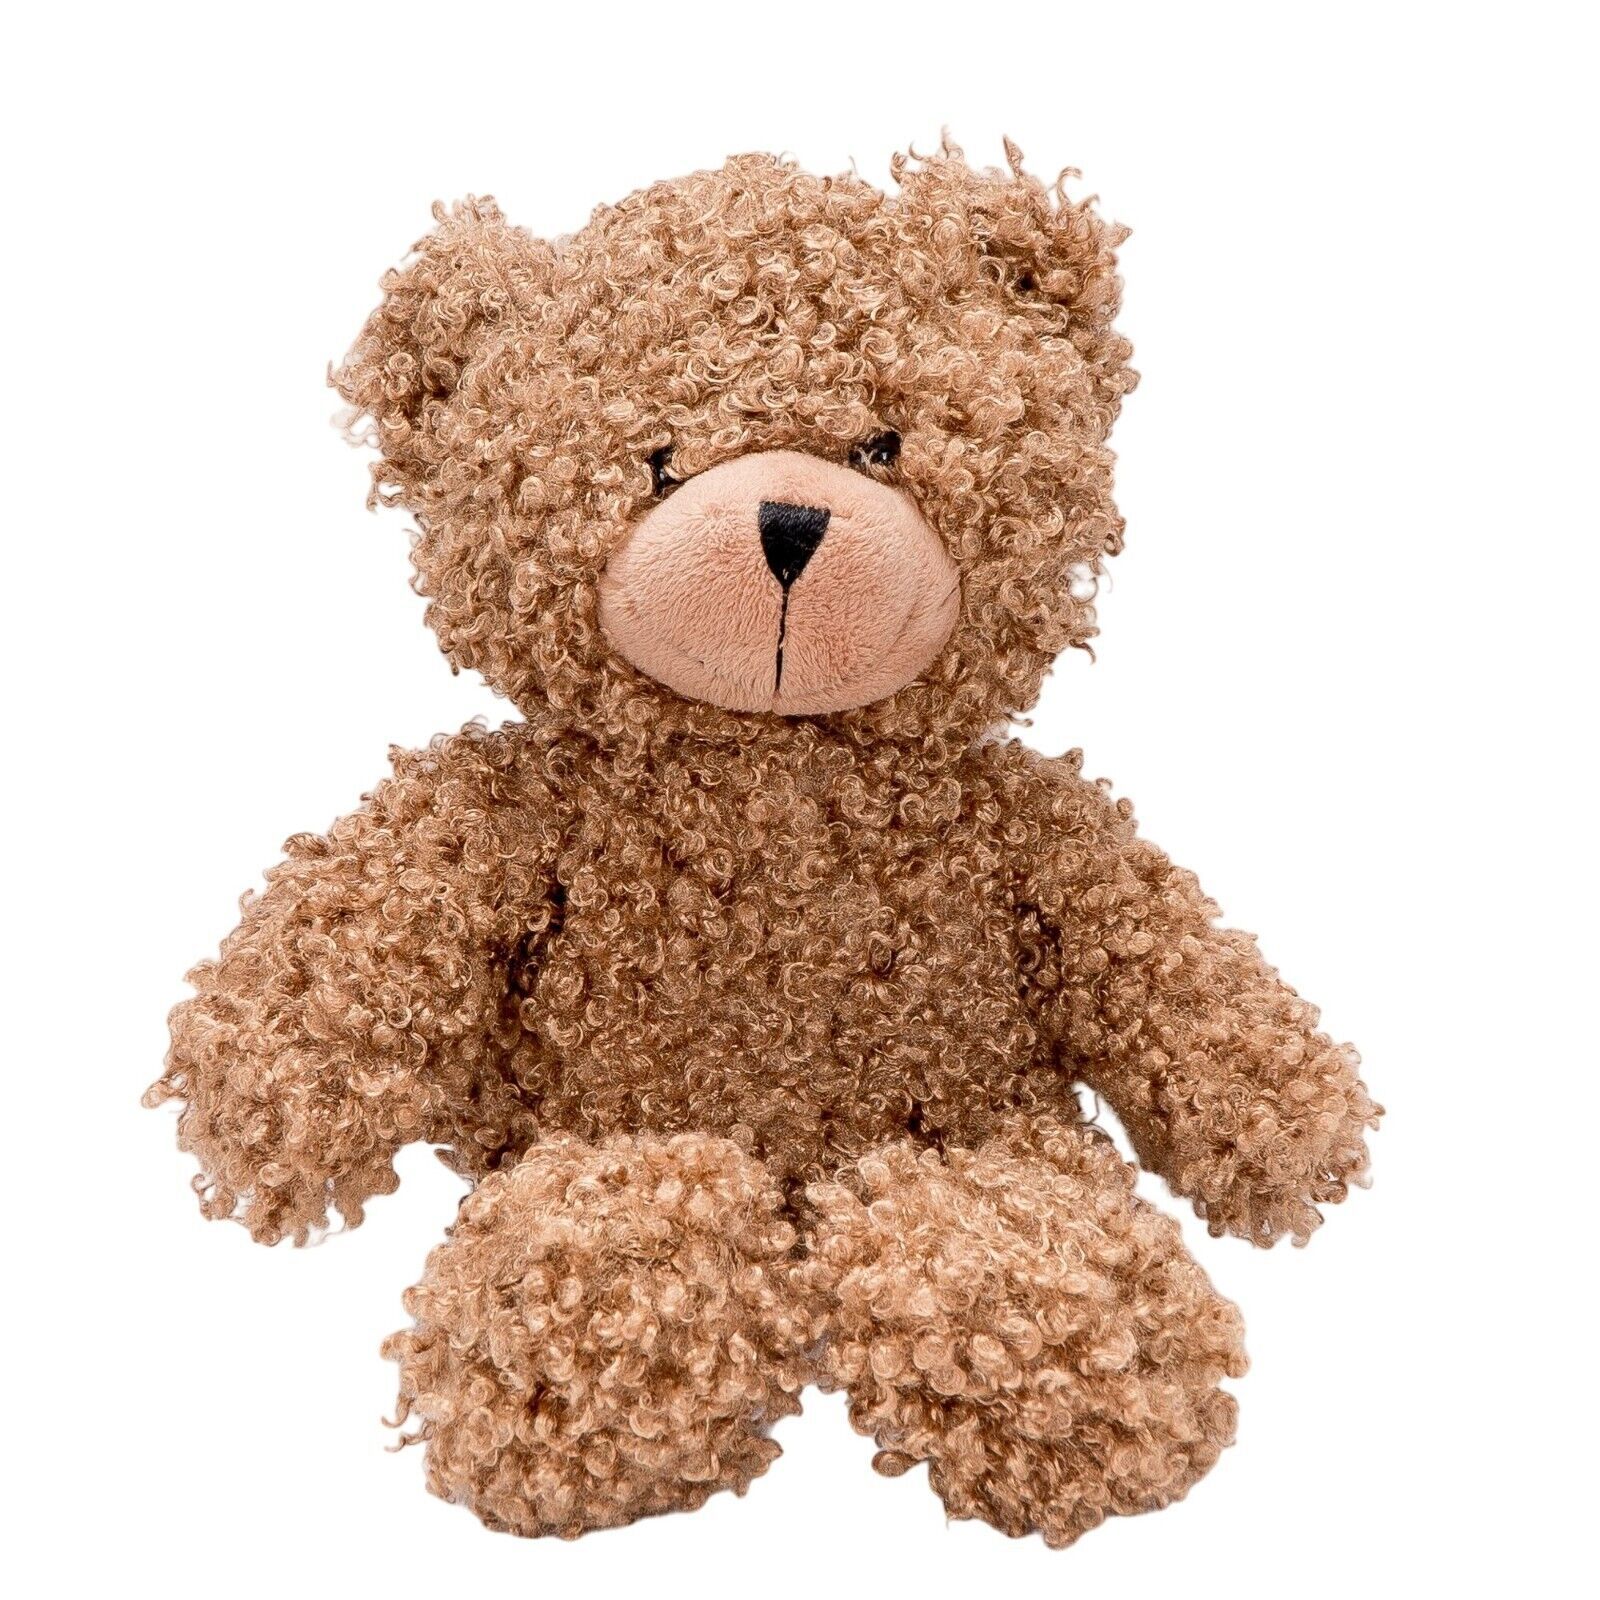 Primary image for Steven Smith Teddy Bear Plush 14" Brown Curly Fur Stuffed Animal Toy